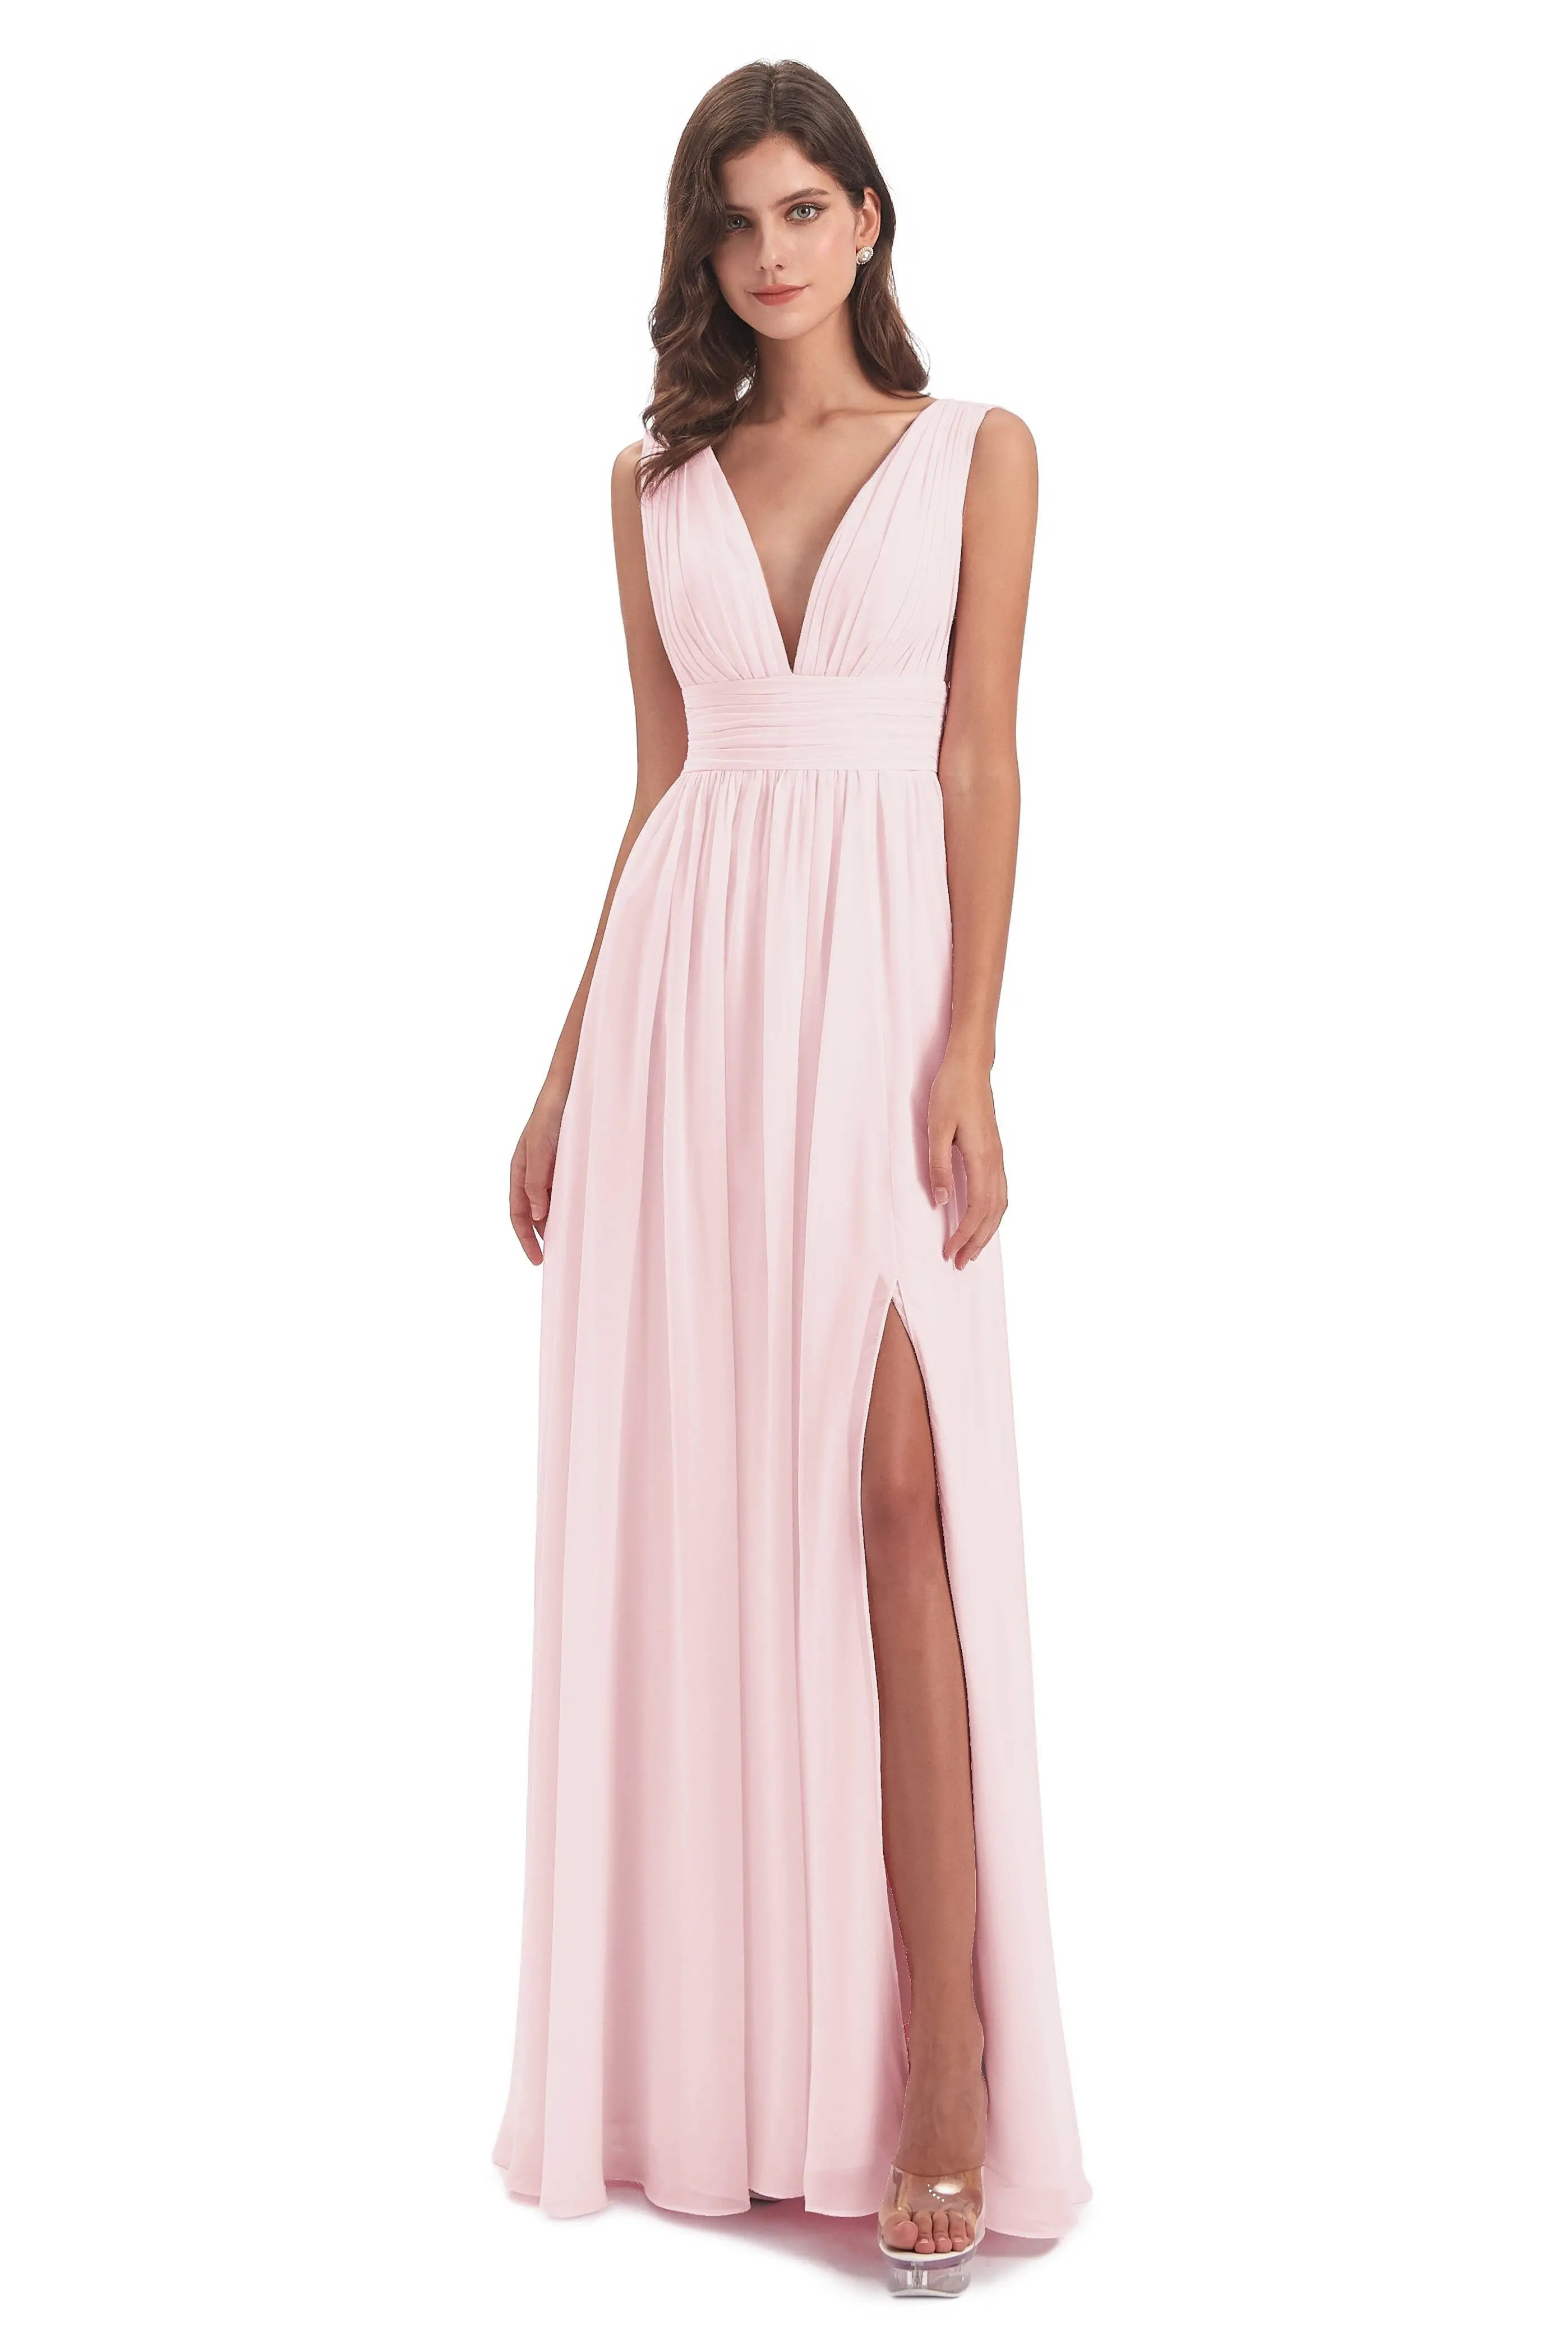 Colors for bridesmaid dresses in 2022 - Blush